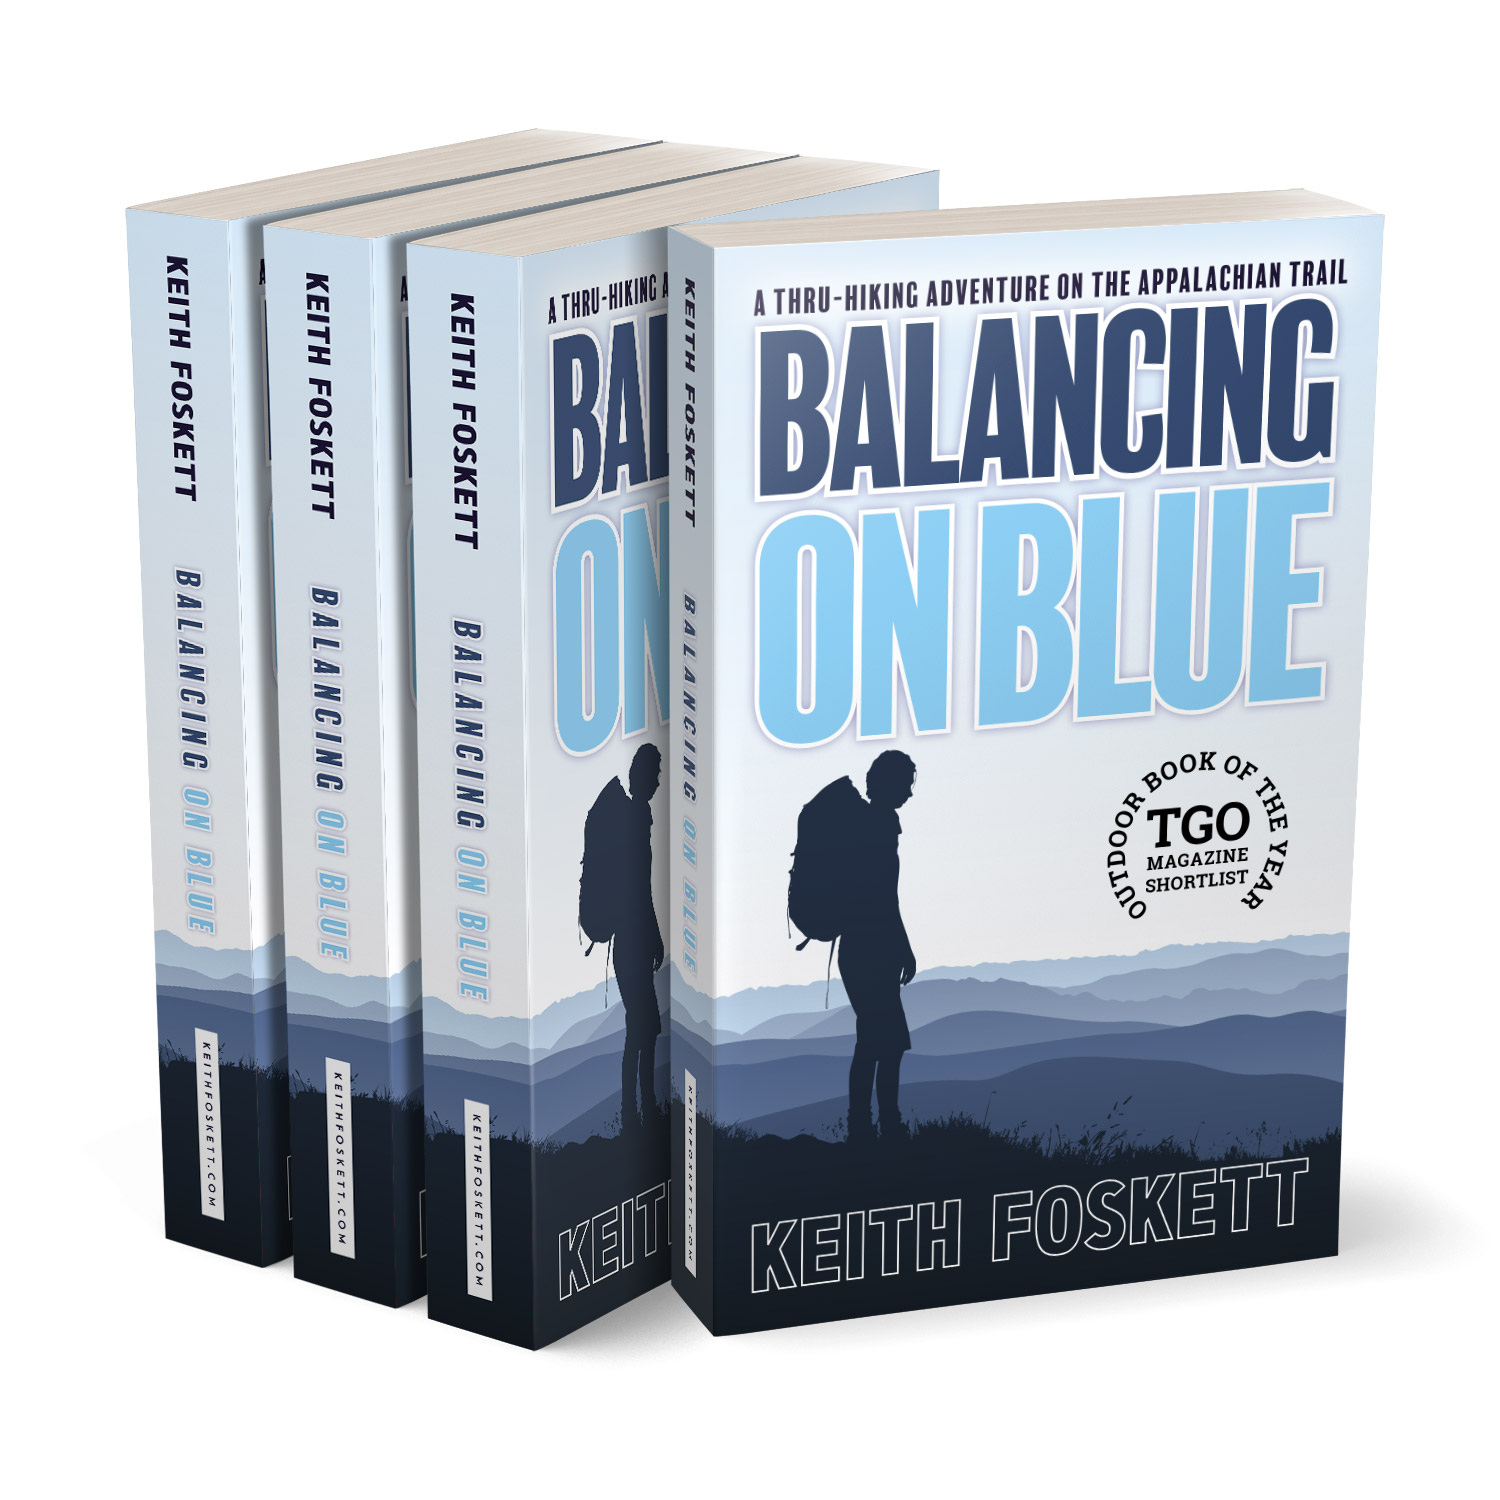 'Balancing On Blue' is an excellent hiking memoir, about one man's thru-hiking adventures in the Appalachians. The author is Keith Foskett. The book cover was designed by Mark Thomas, of coverness.com. To find out more about my book design services, please visit www.coverness.com.